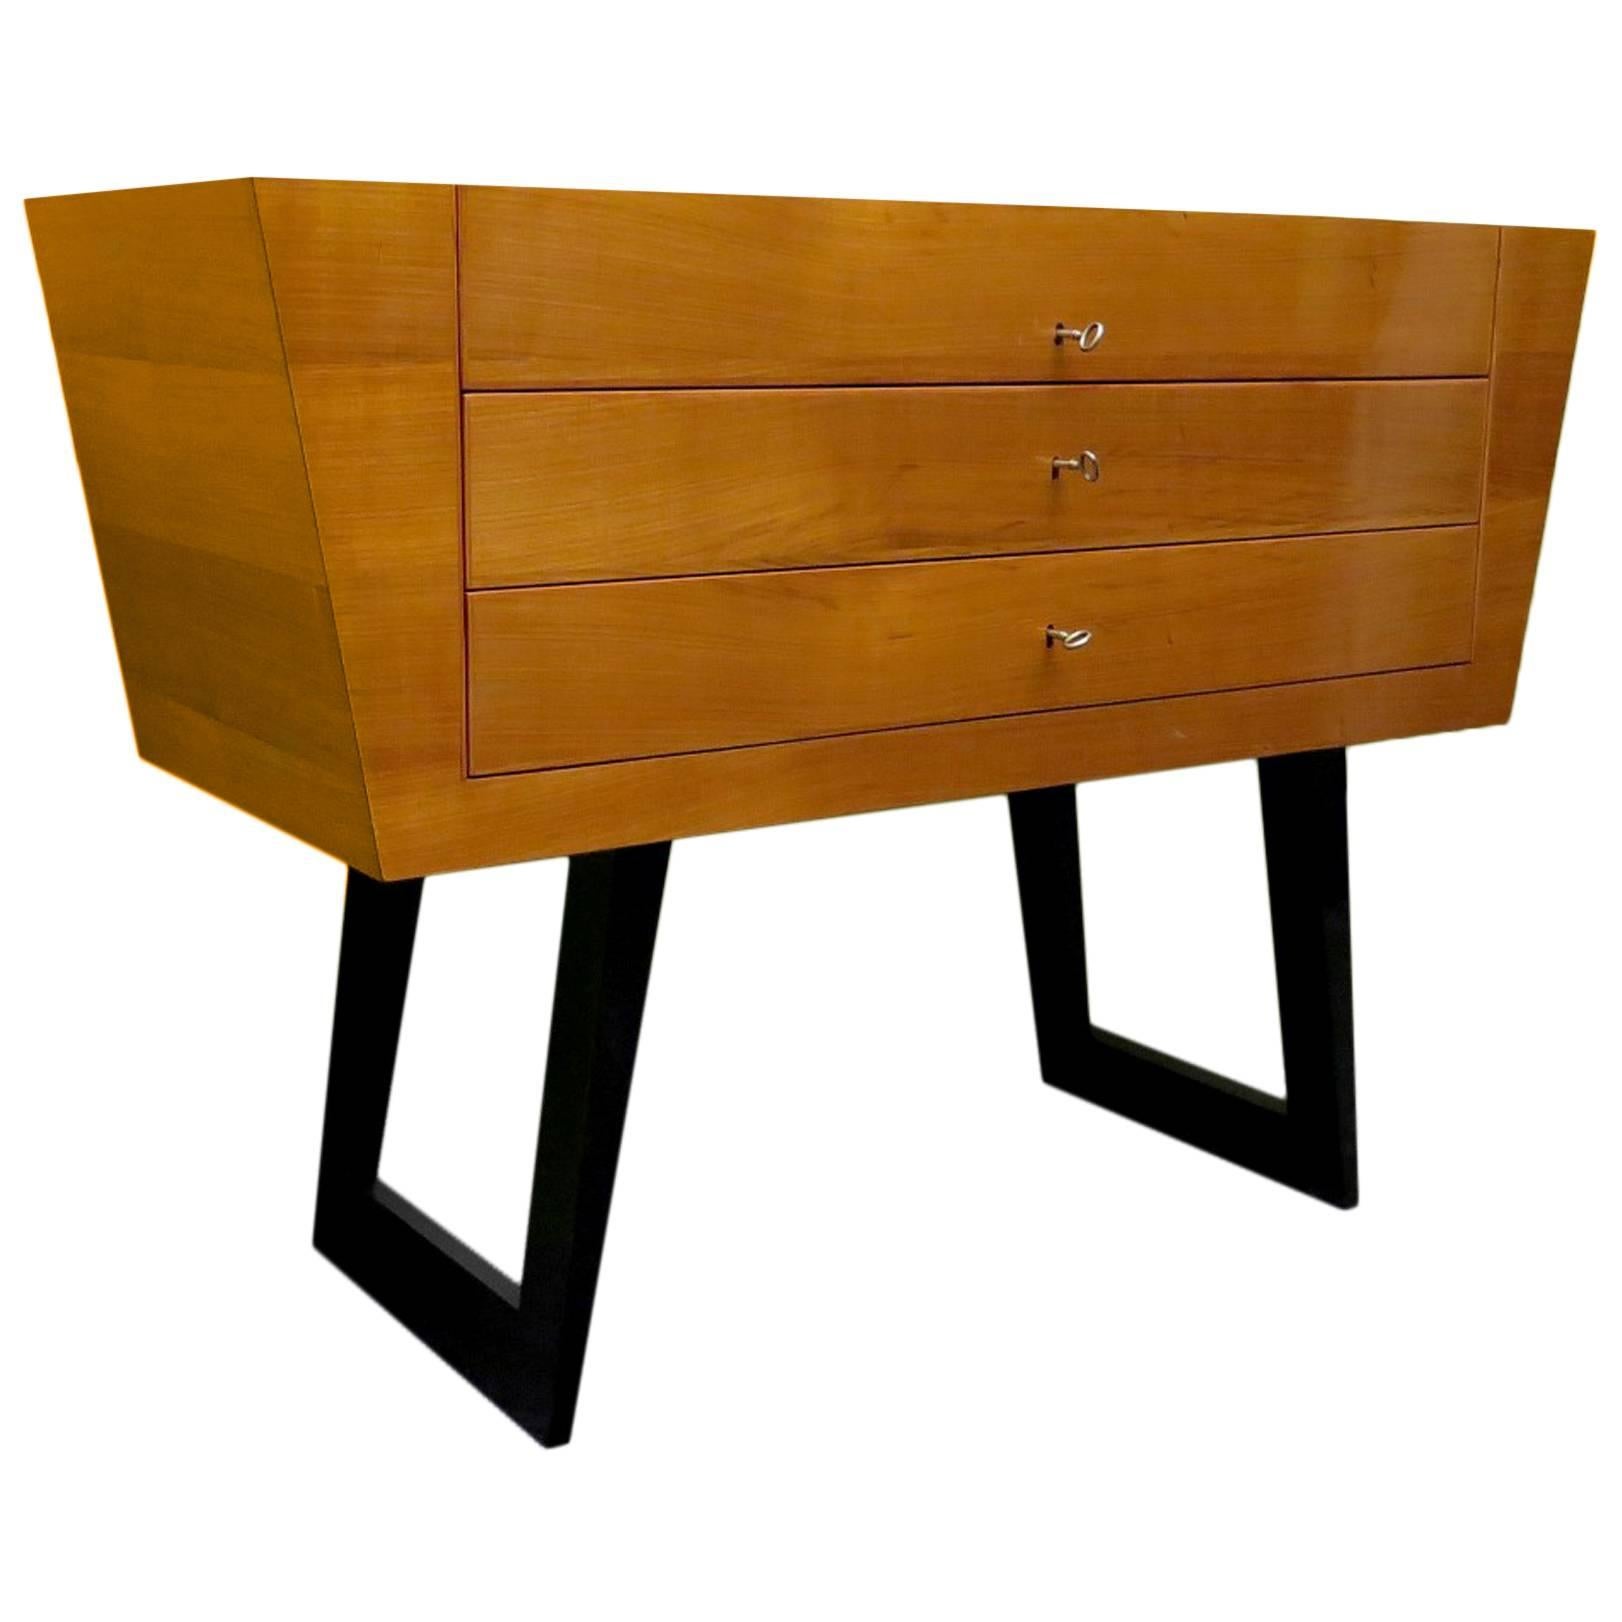 Midcentury Cherrywood Italian Chest of Drawers, 1950 For Sale